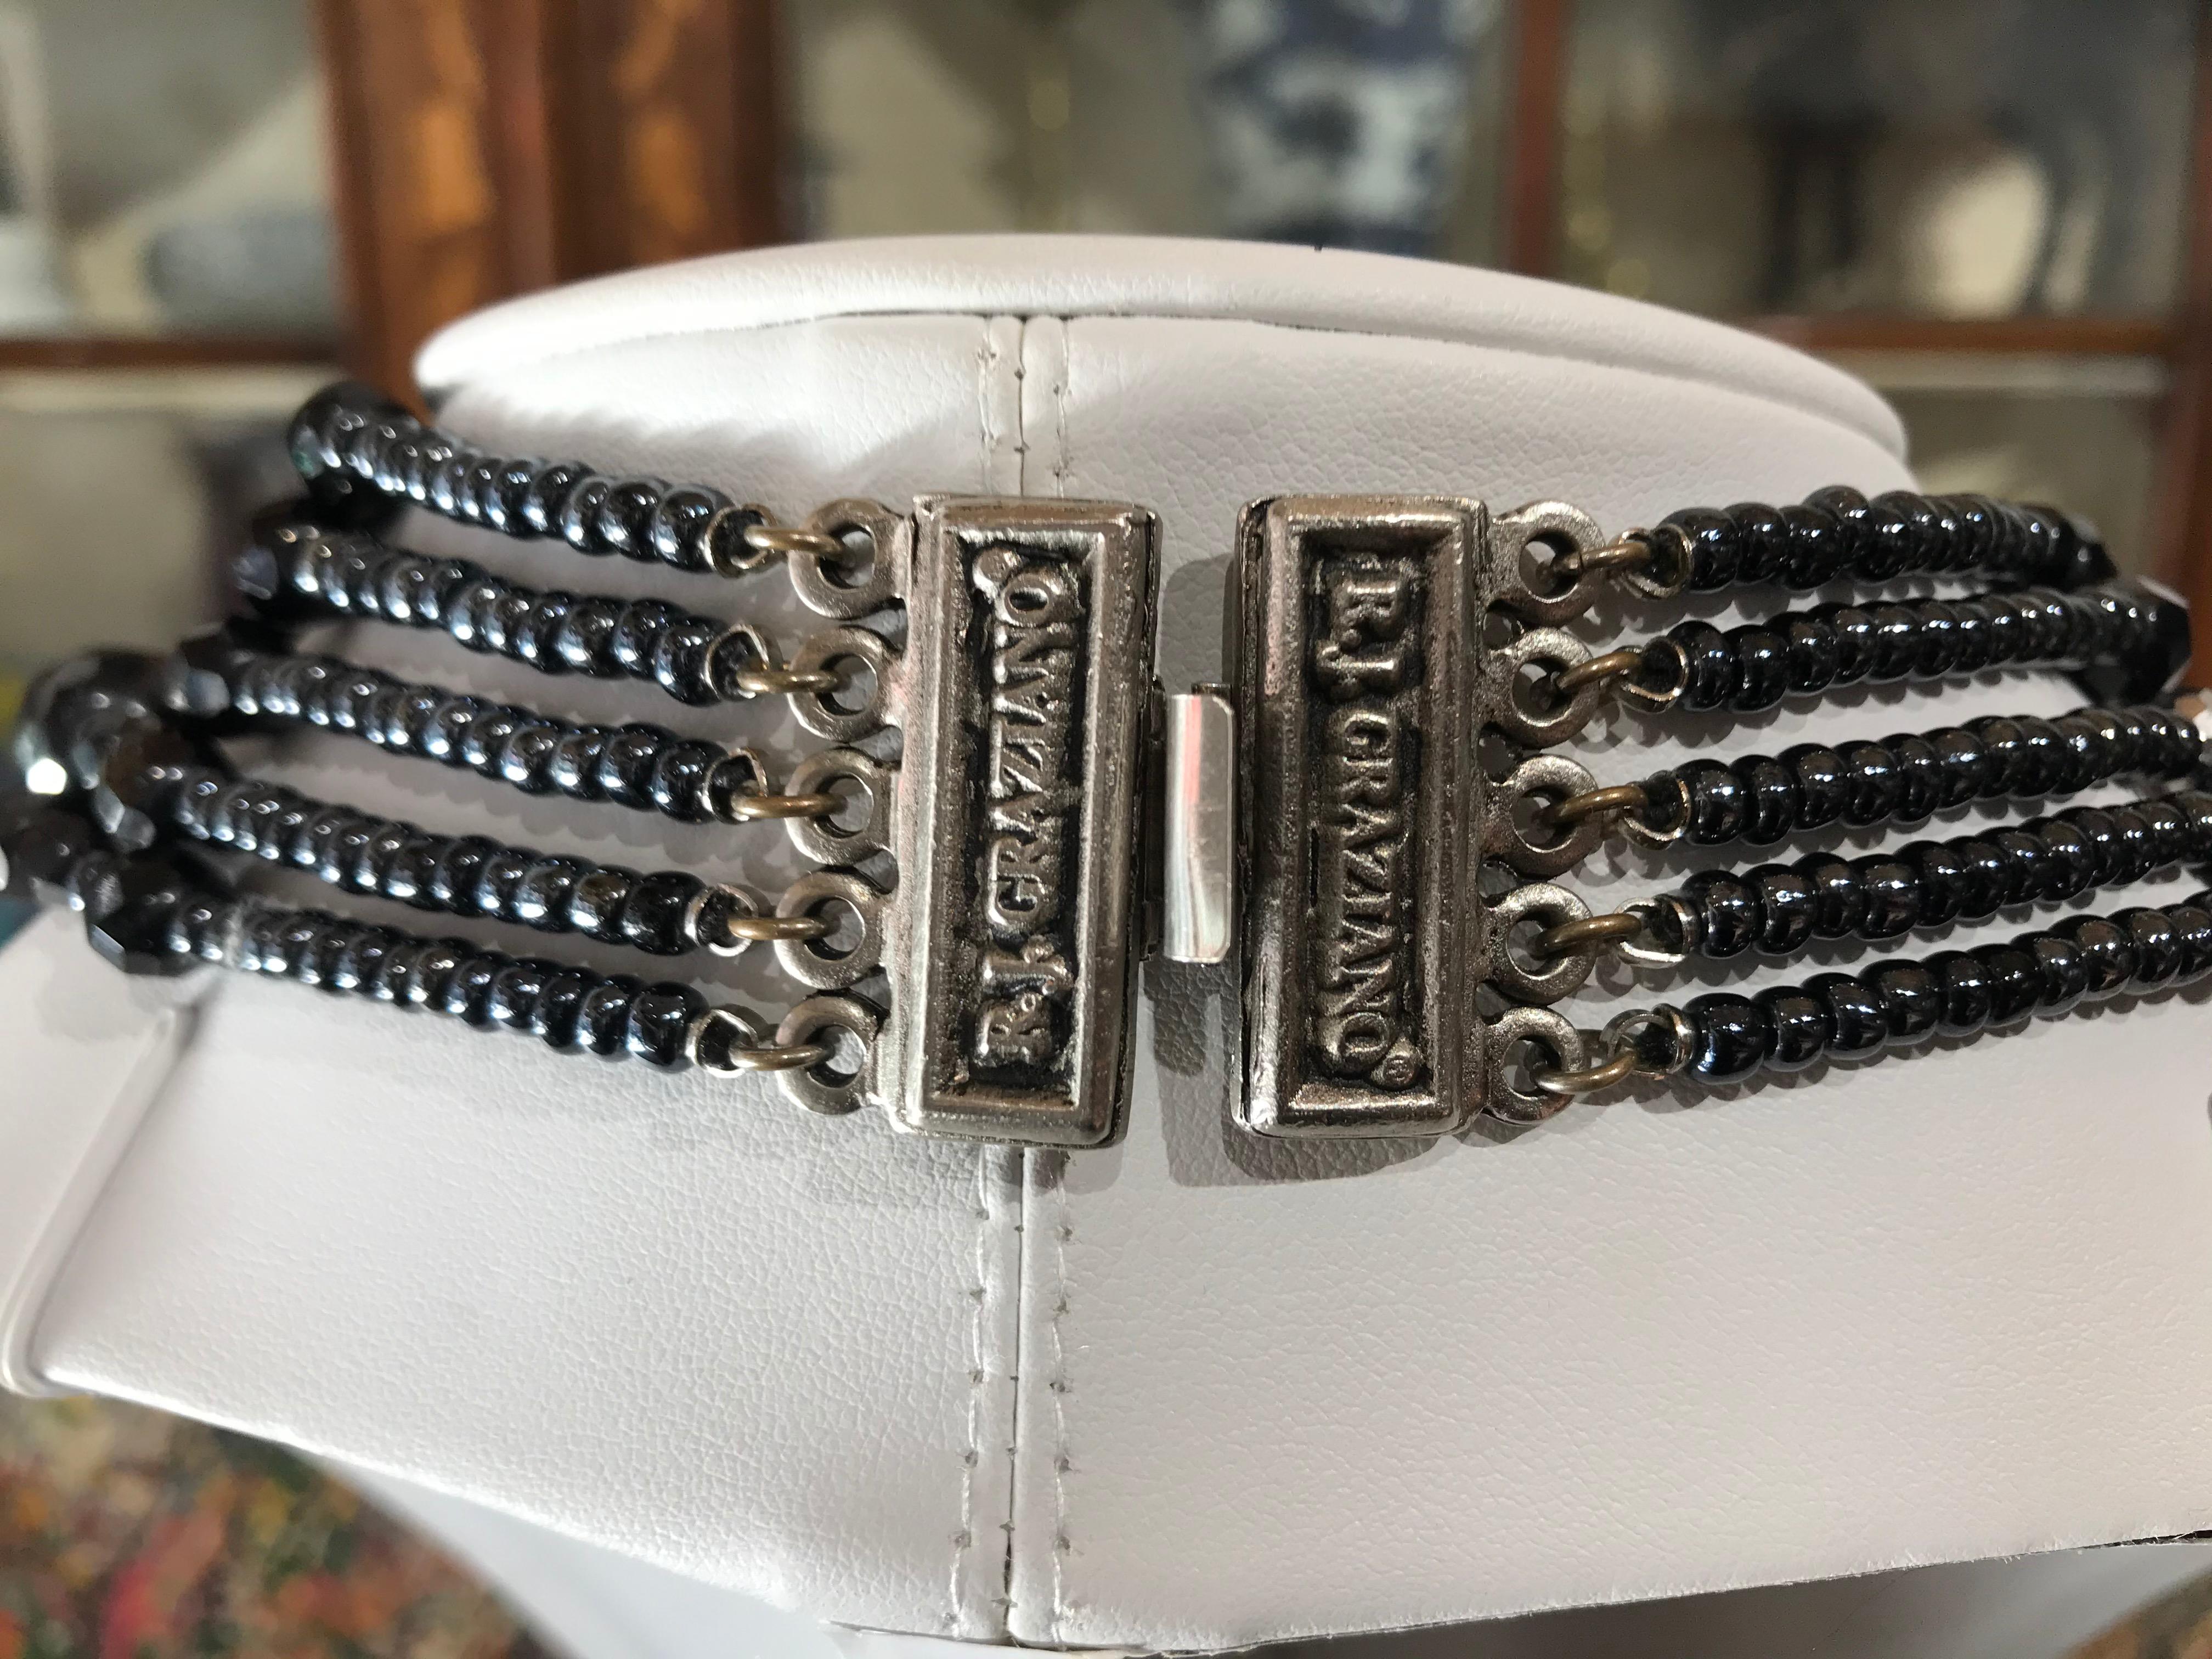 Beautiful Signed R.J. Graziano Designer Multi-Strand Bib Necklace; comprising of 5 strands of faceted black glass beads of varying sizes further enhanced with small sparkling glass beads and held with a signed R.J. Graziano silver tone box clasp,